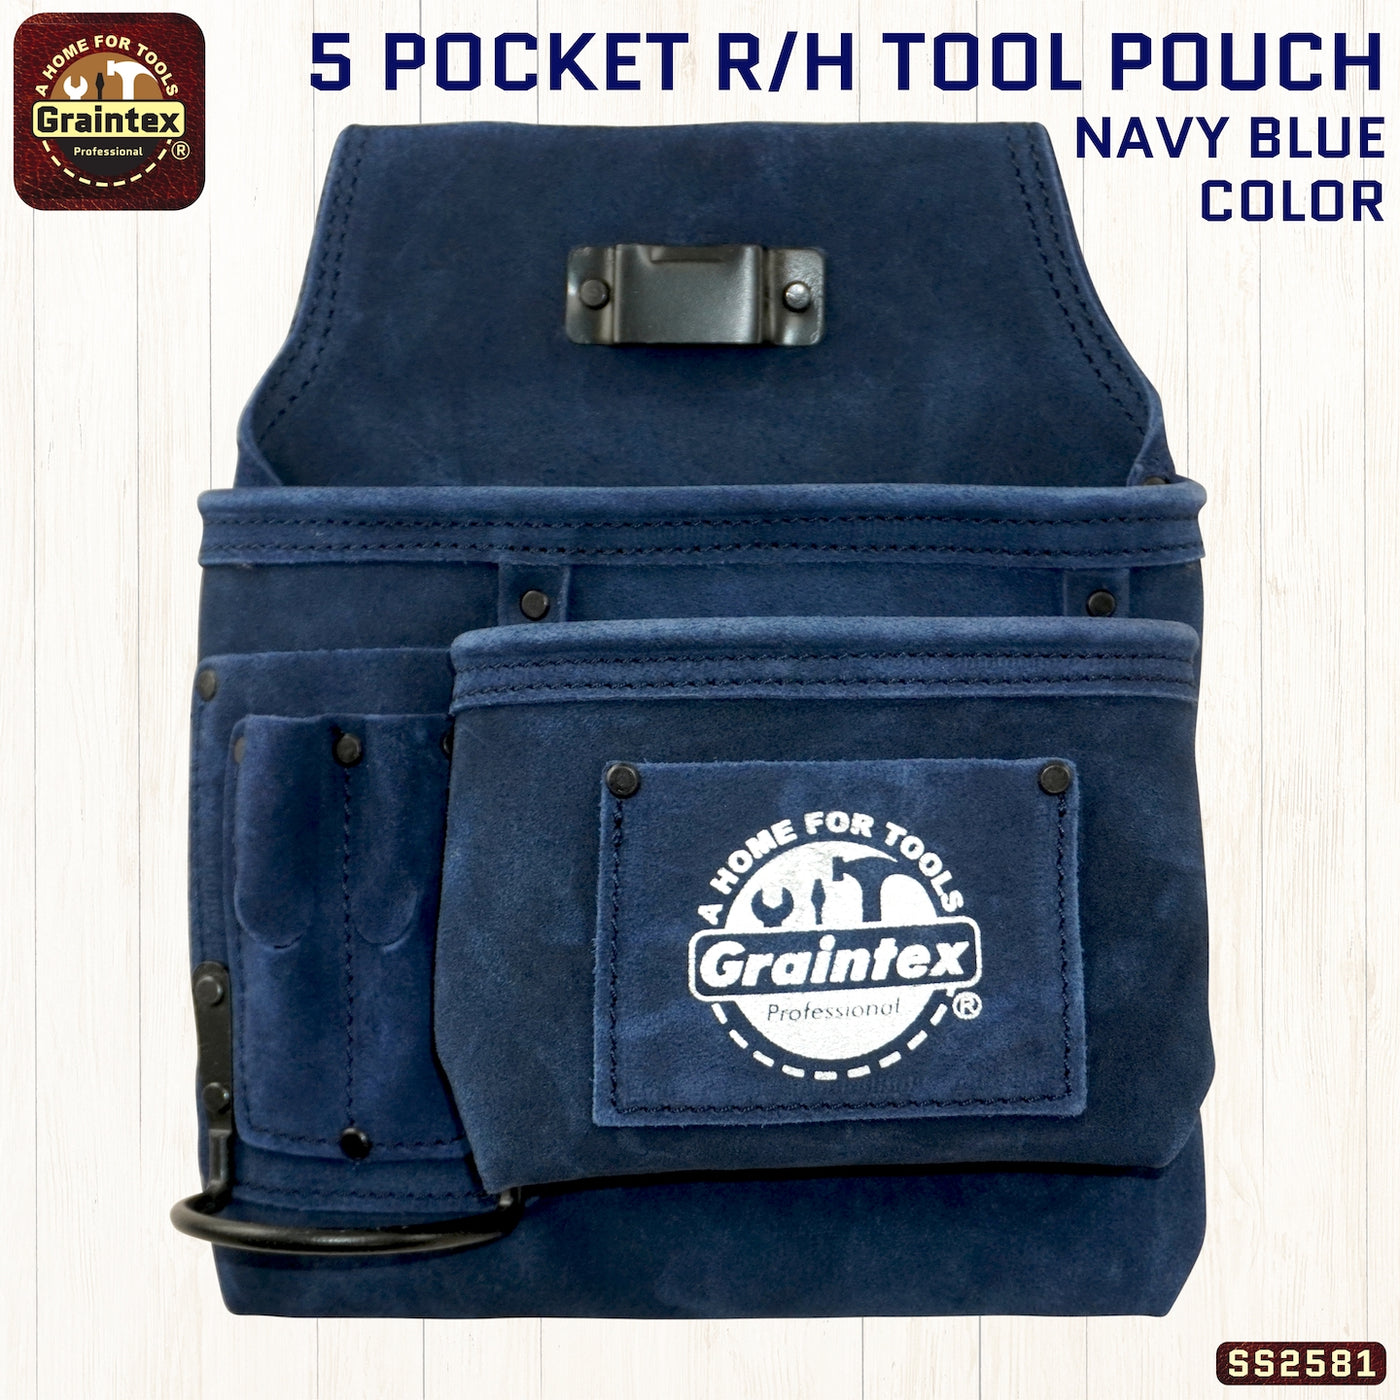 SS2581 :: 5 Pocket Right Handed Nail & Tool Pouch Navy Blue Color Suede Leather